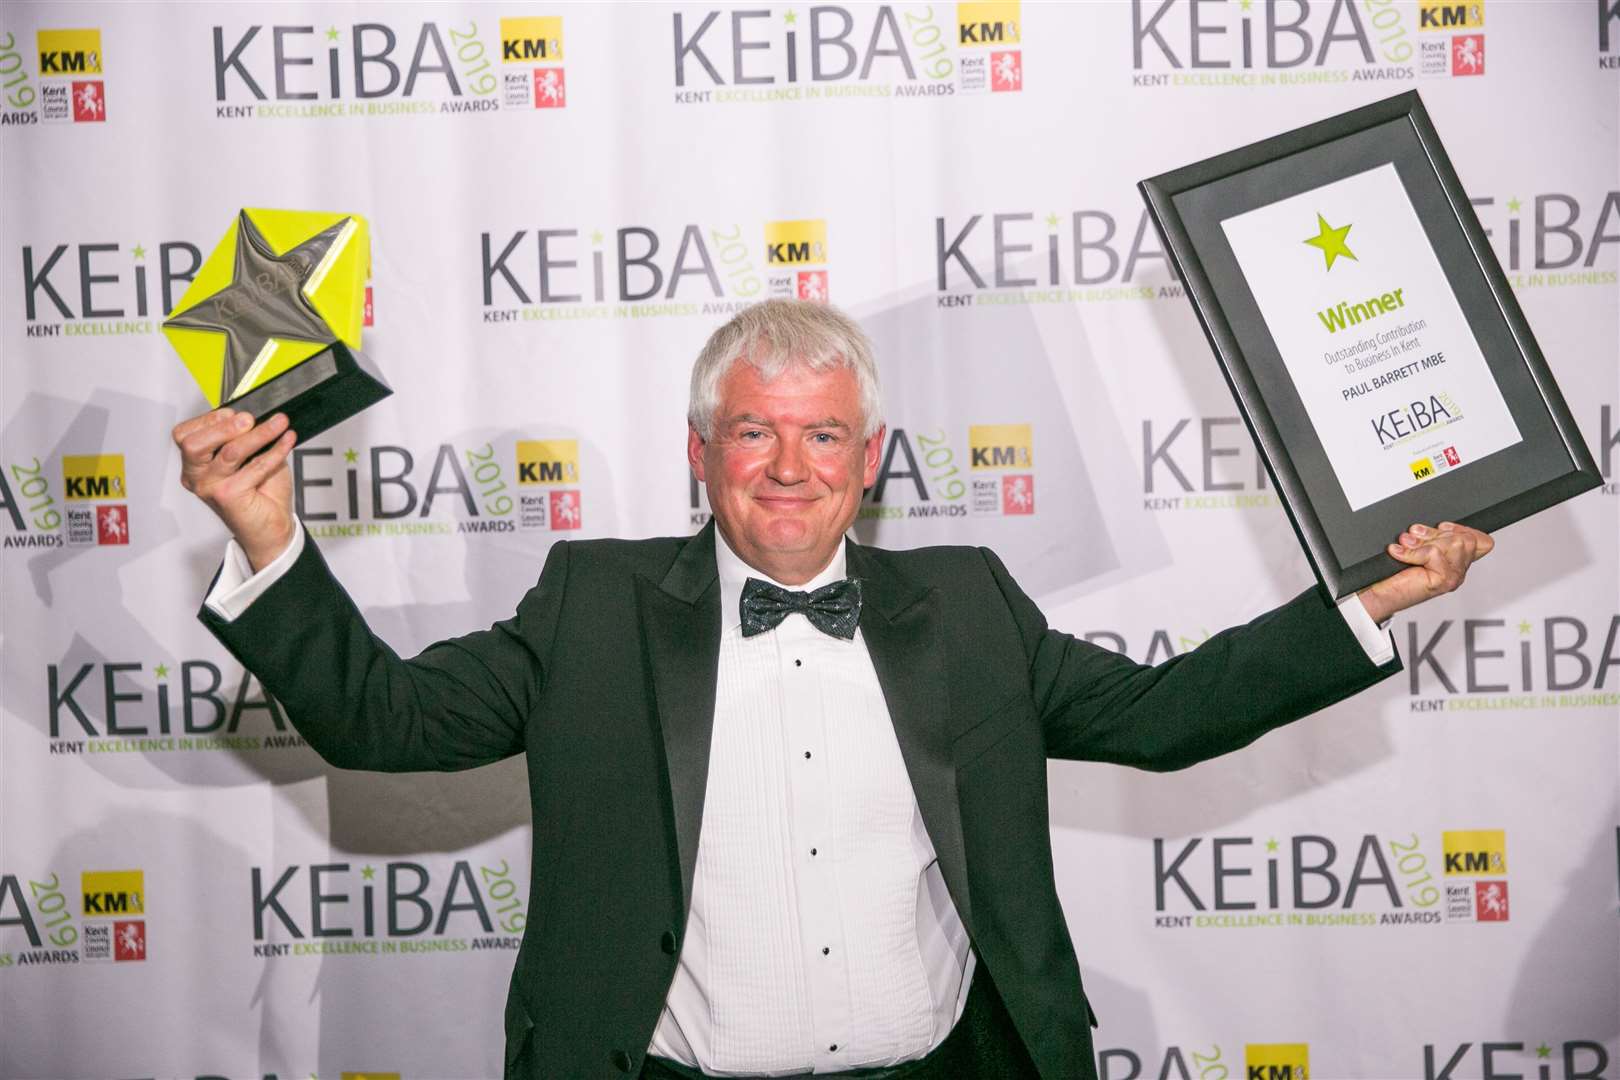 Paul Barrett won the Outstanding Contribution to Business in Kent in 2019